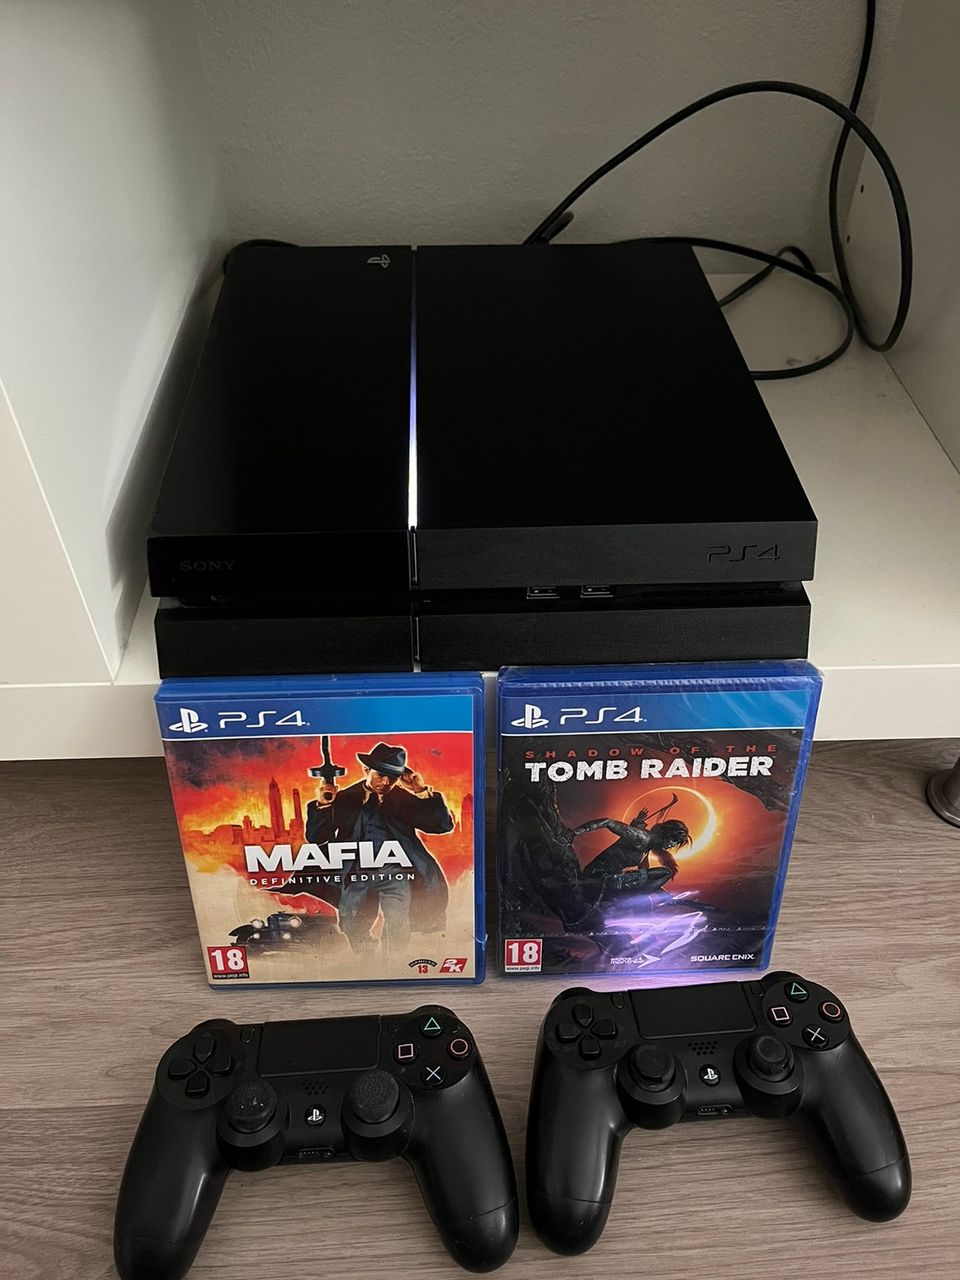 PlayStation 4 + 2 controllers + games